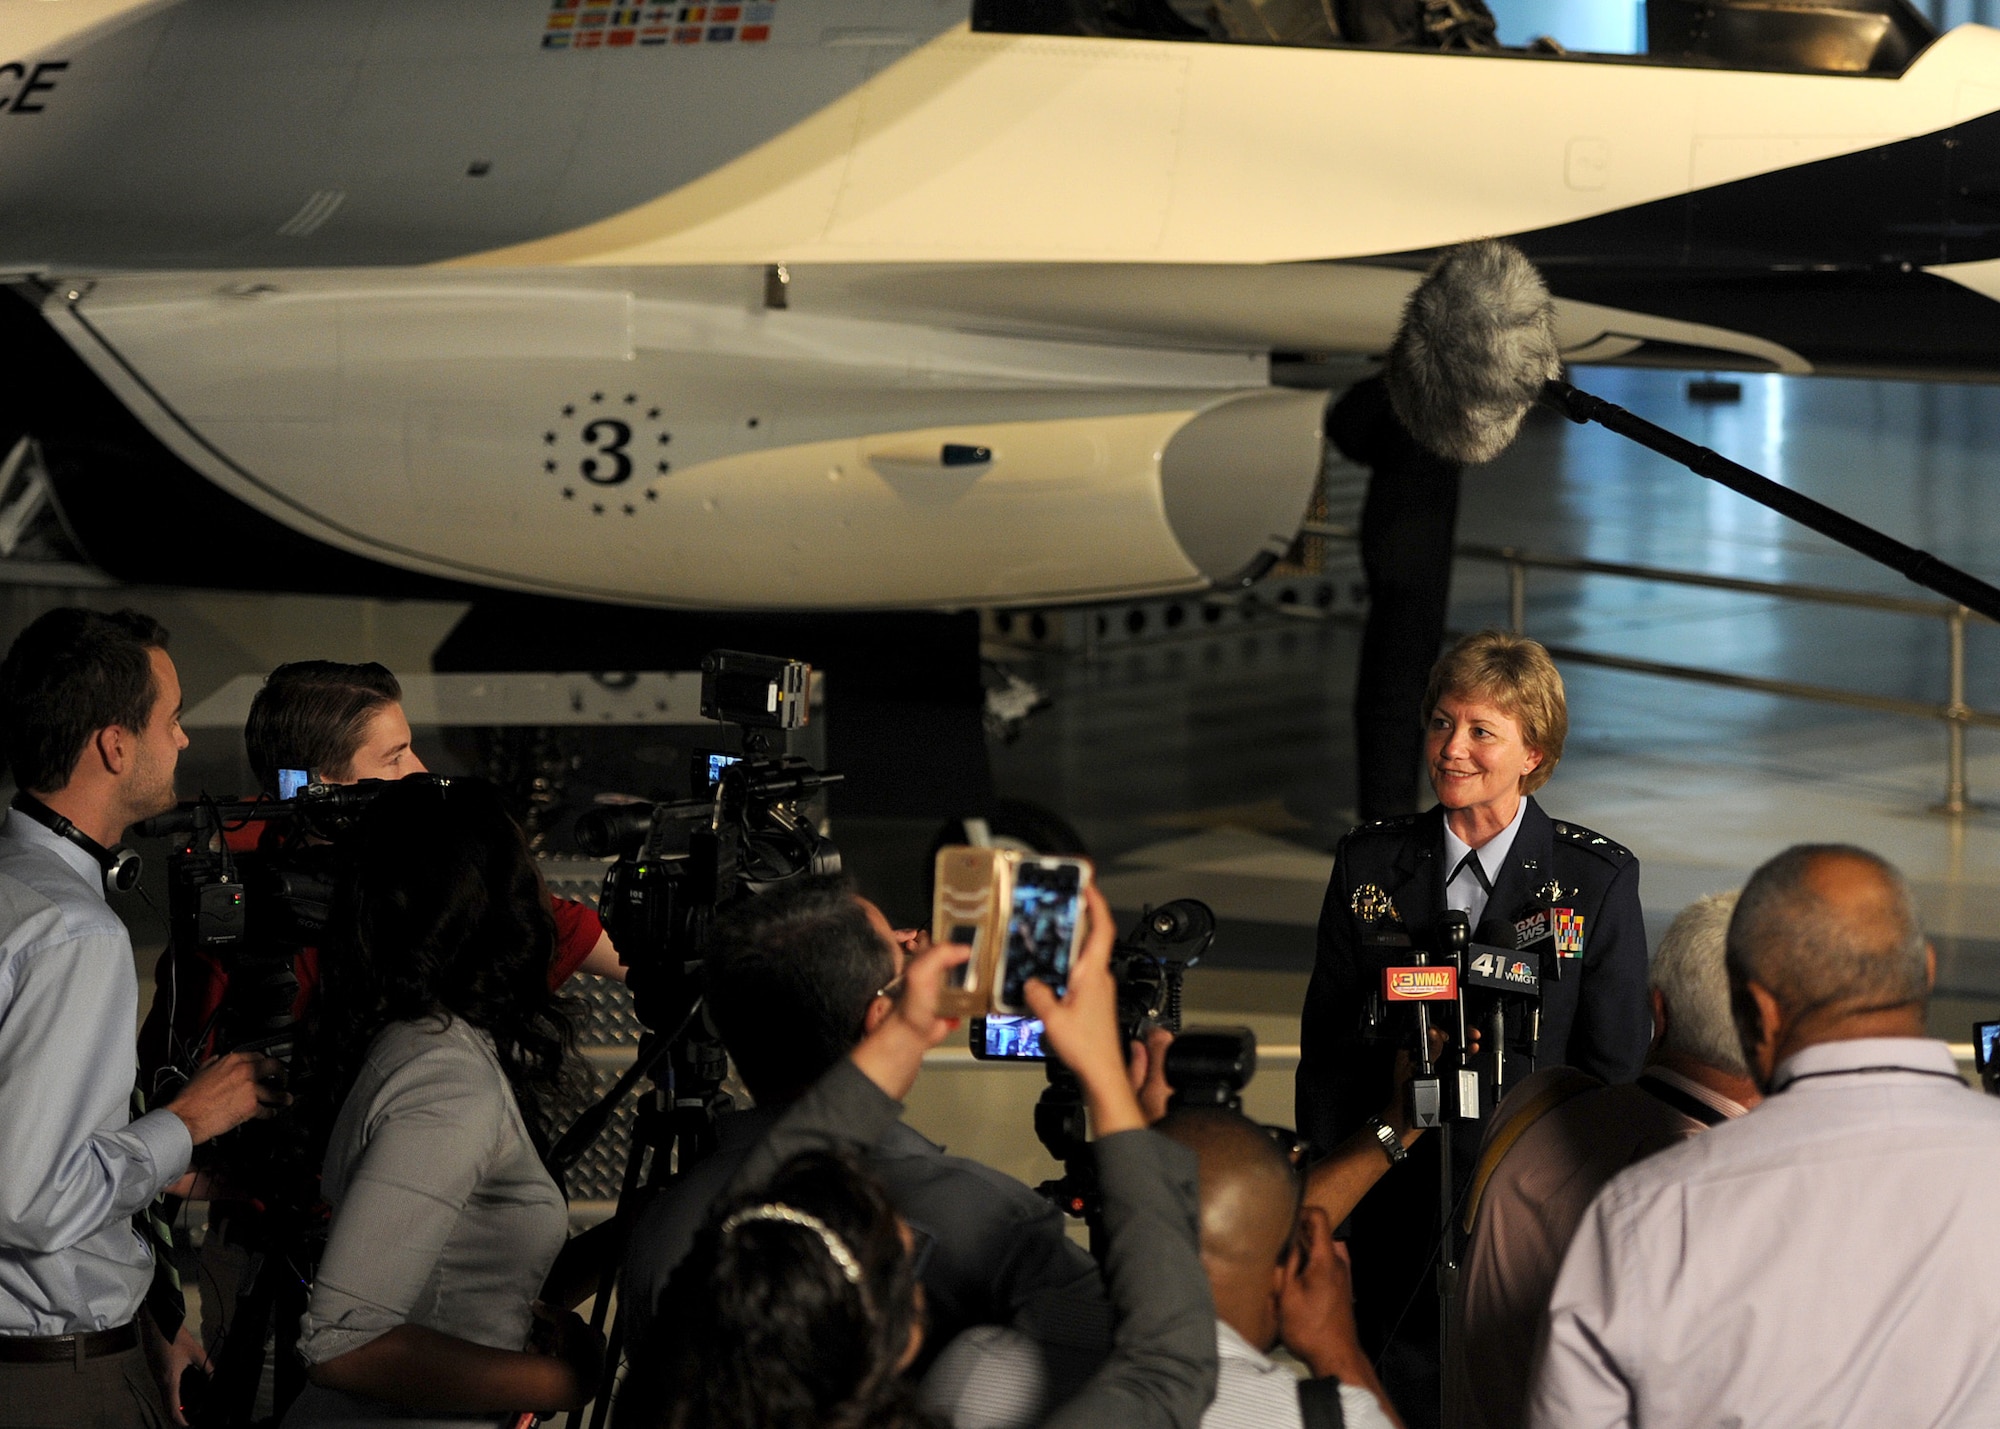 Newly appointed commander of Air Force Reserve Command, Lt. Gen. Maryanne Miller, talks with the media after her change of command ceremony at the Museum of Aviation in Warner Robins, Ga., July 15, 2016. Miller became the first female to assume command of AFRC. (U.S. Air Force photo by Tech. Sgt. Stephen D. Schester)